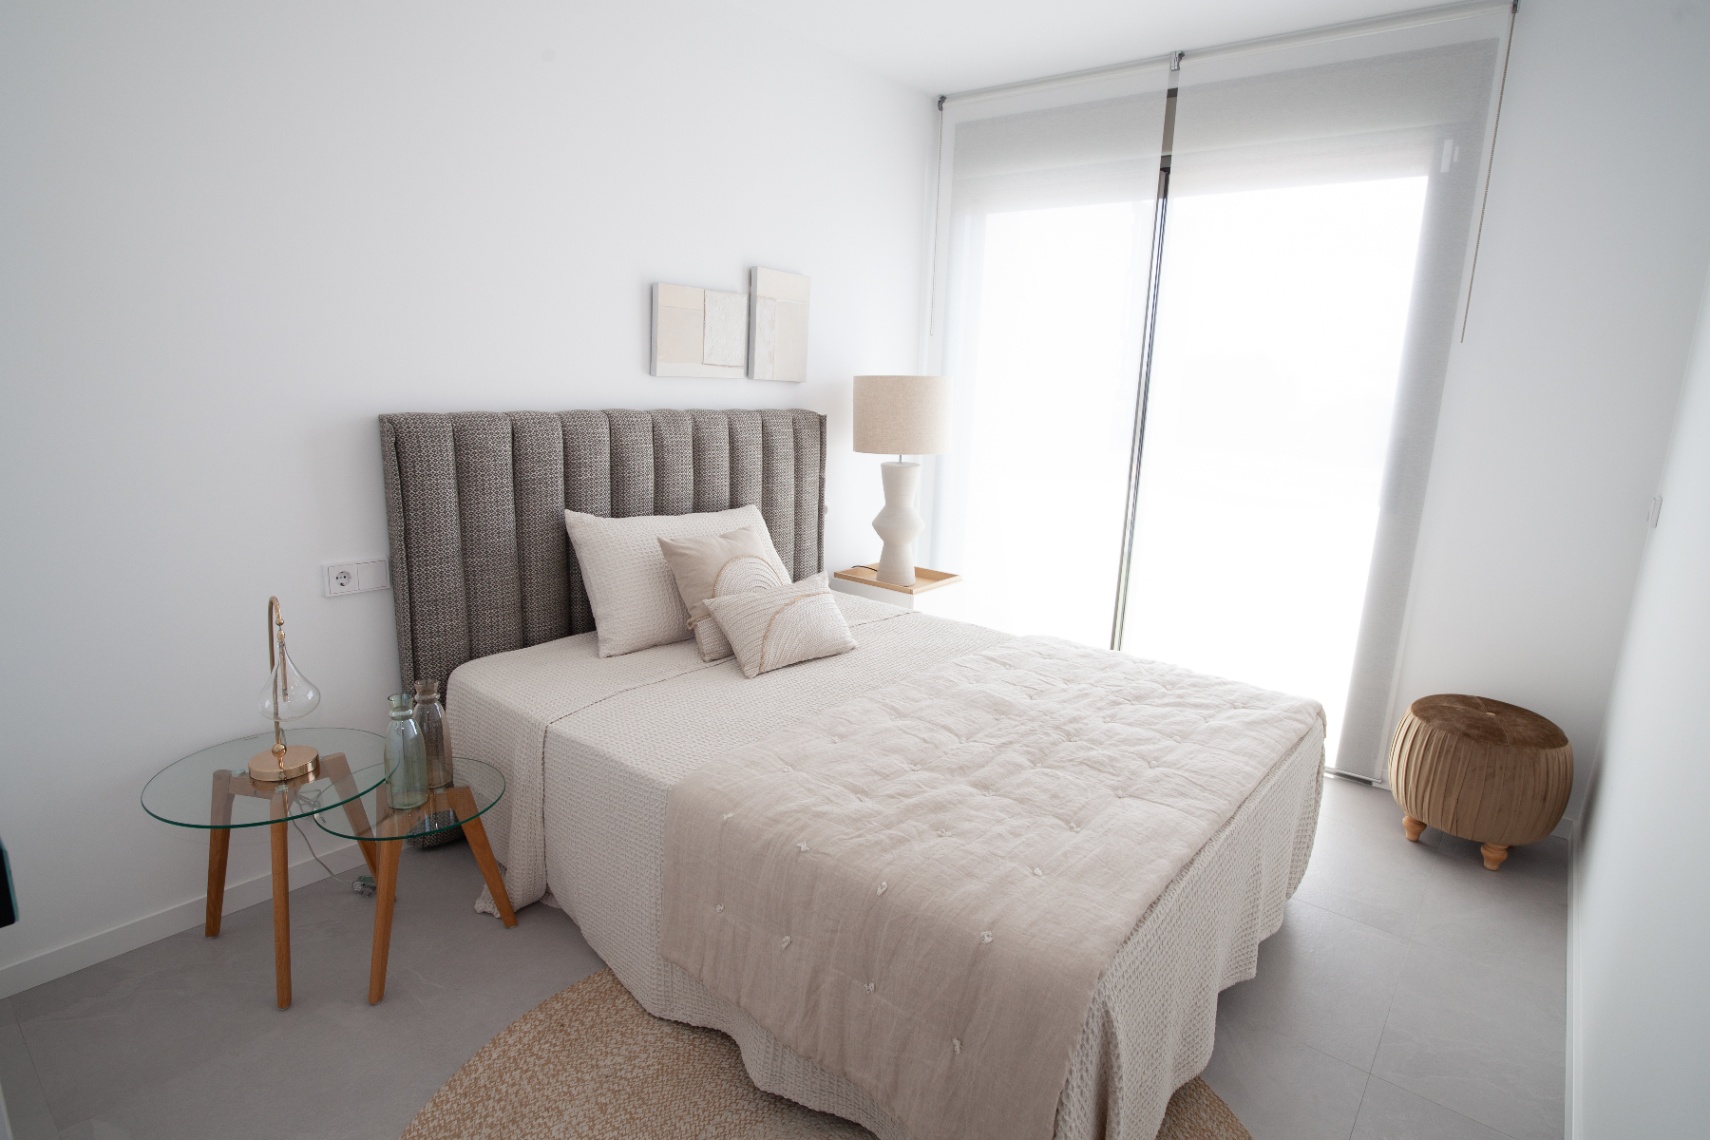 Newly built apartments with wonderful views of Benidorm